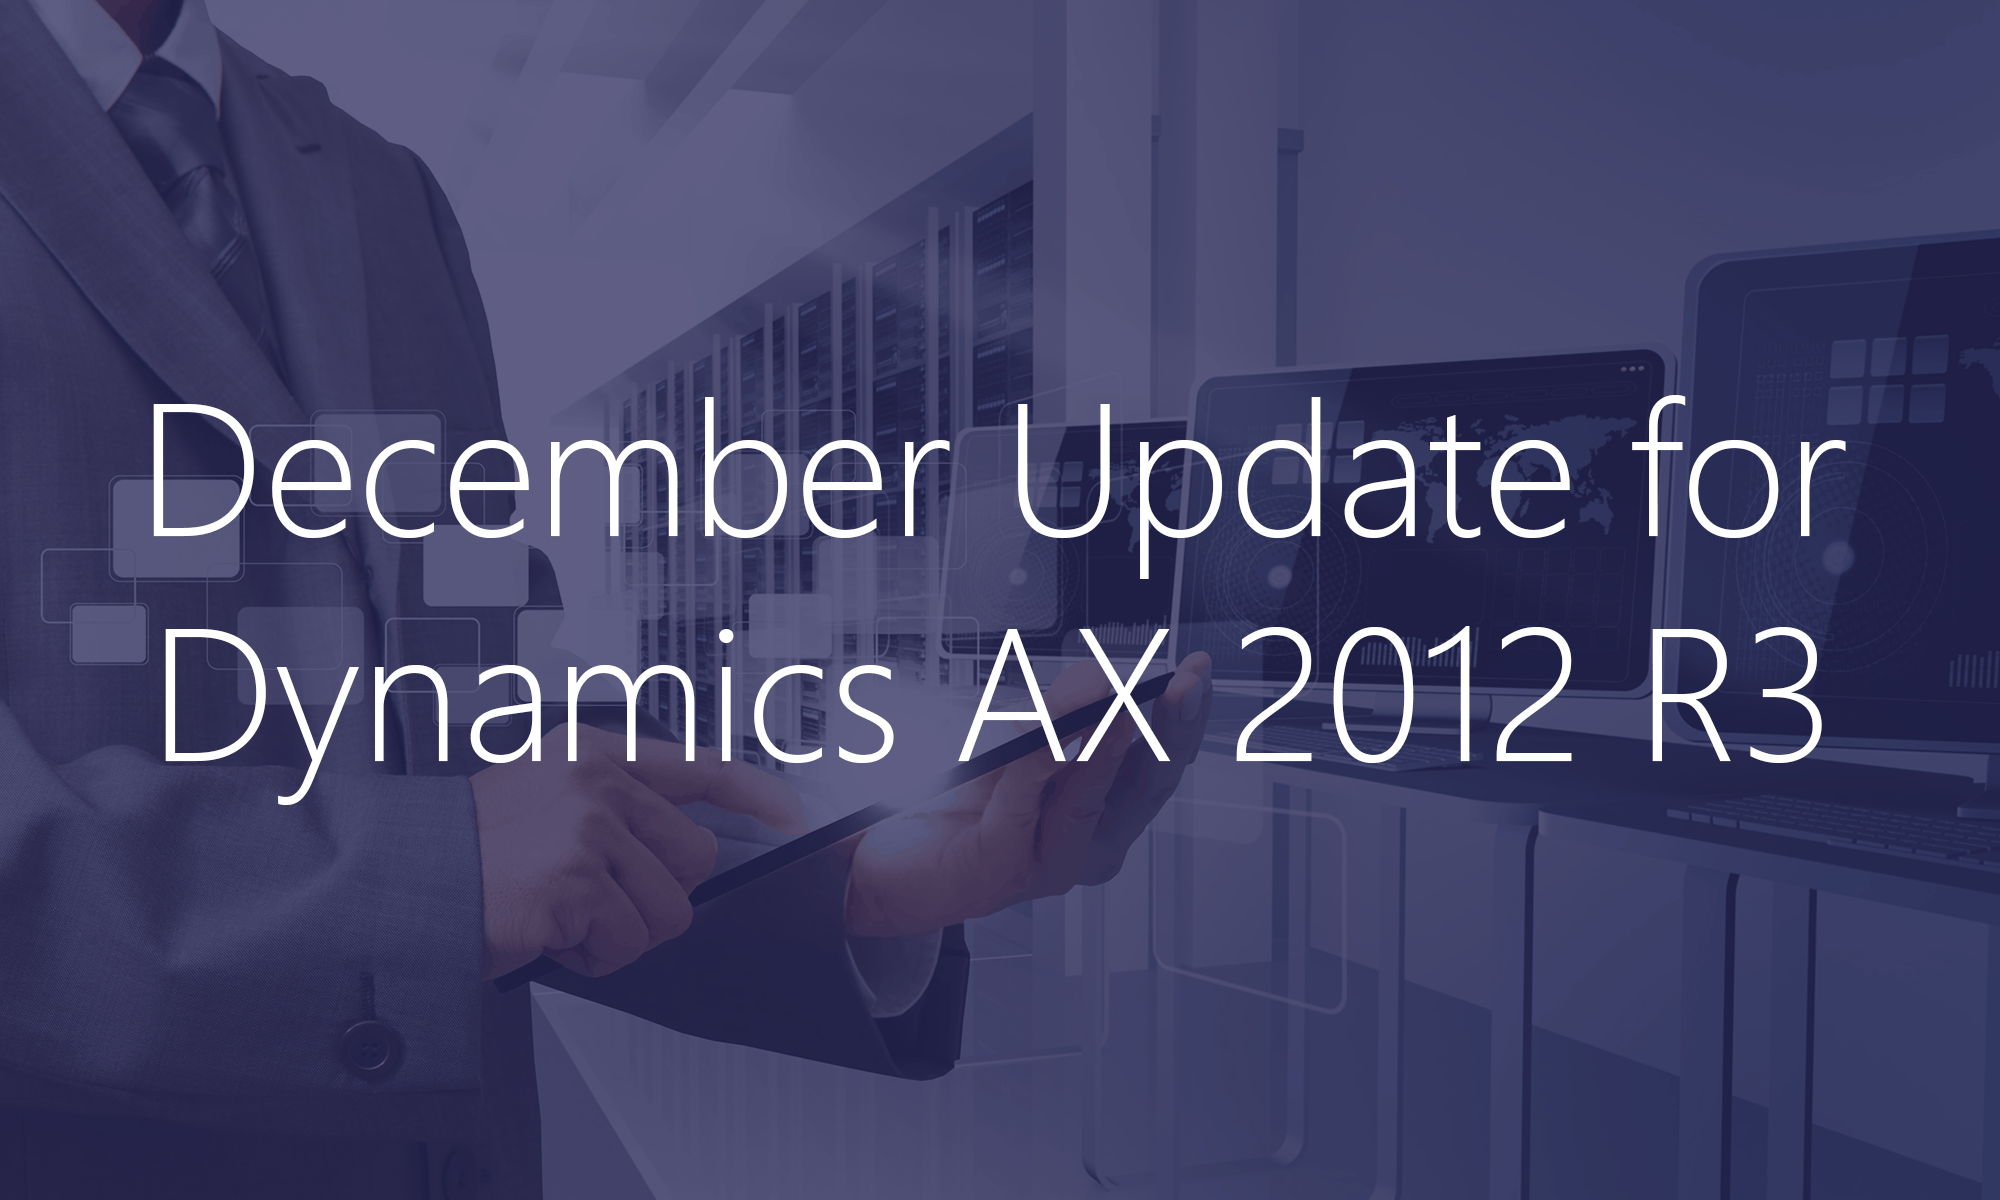 December Update for Dynamics AX 2012 R3